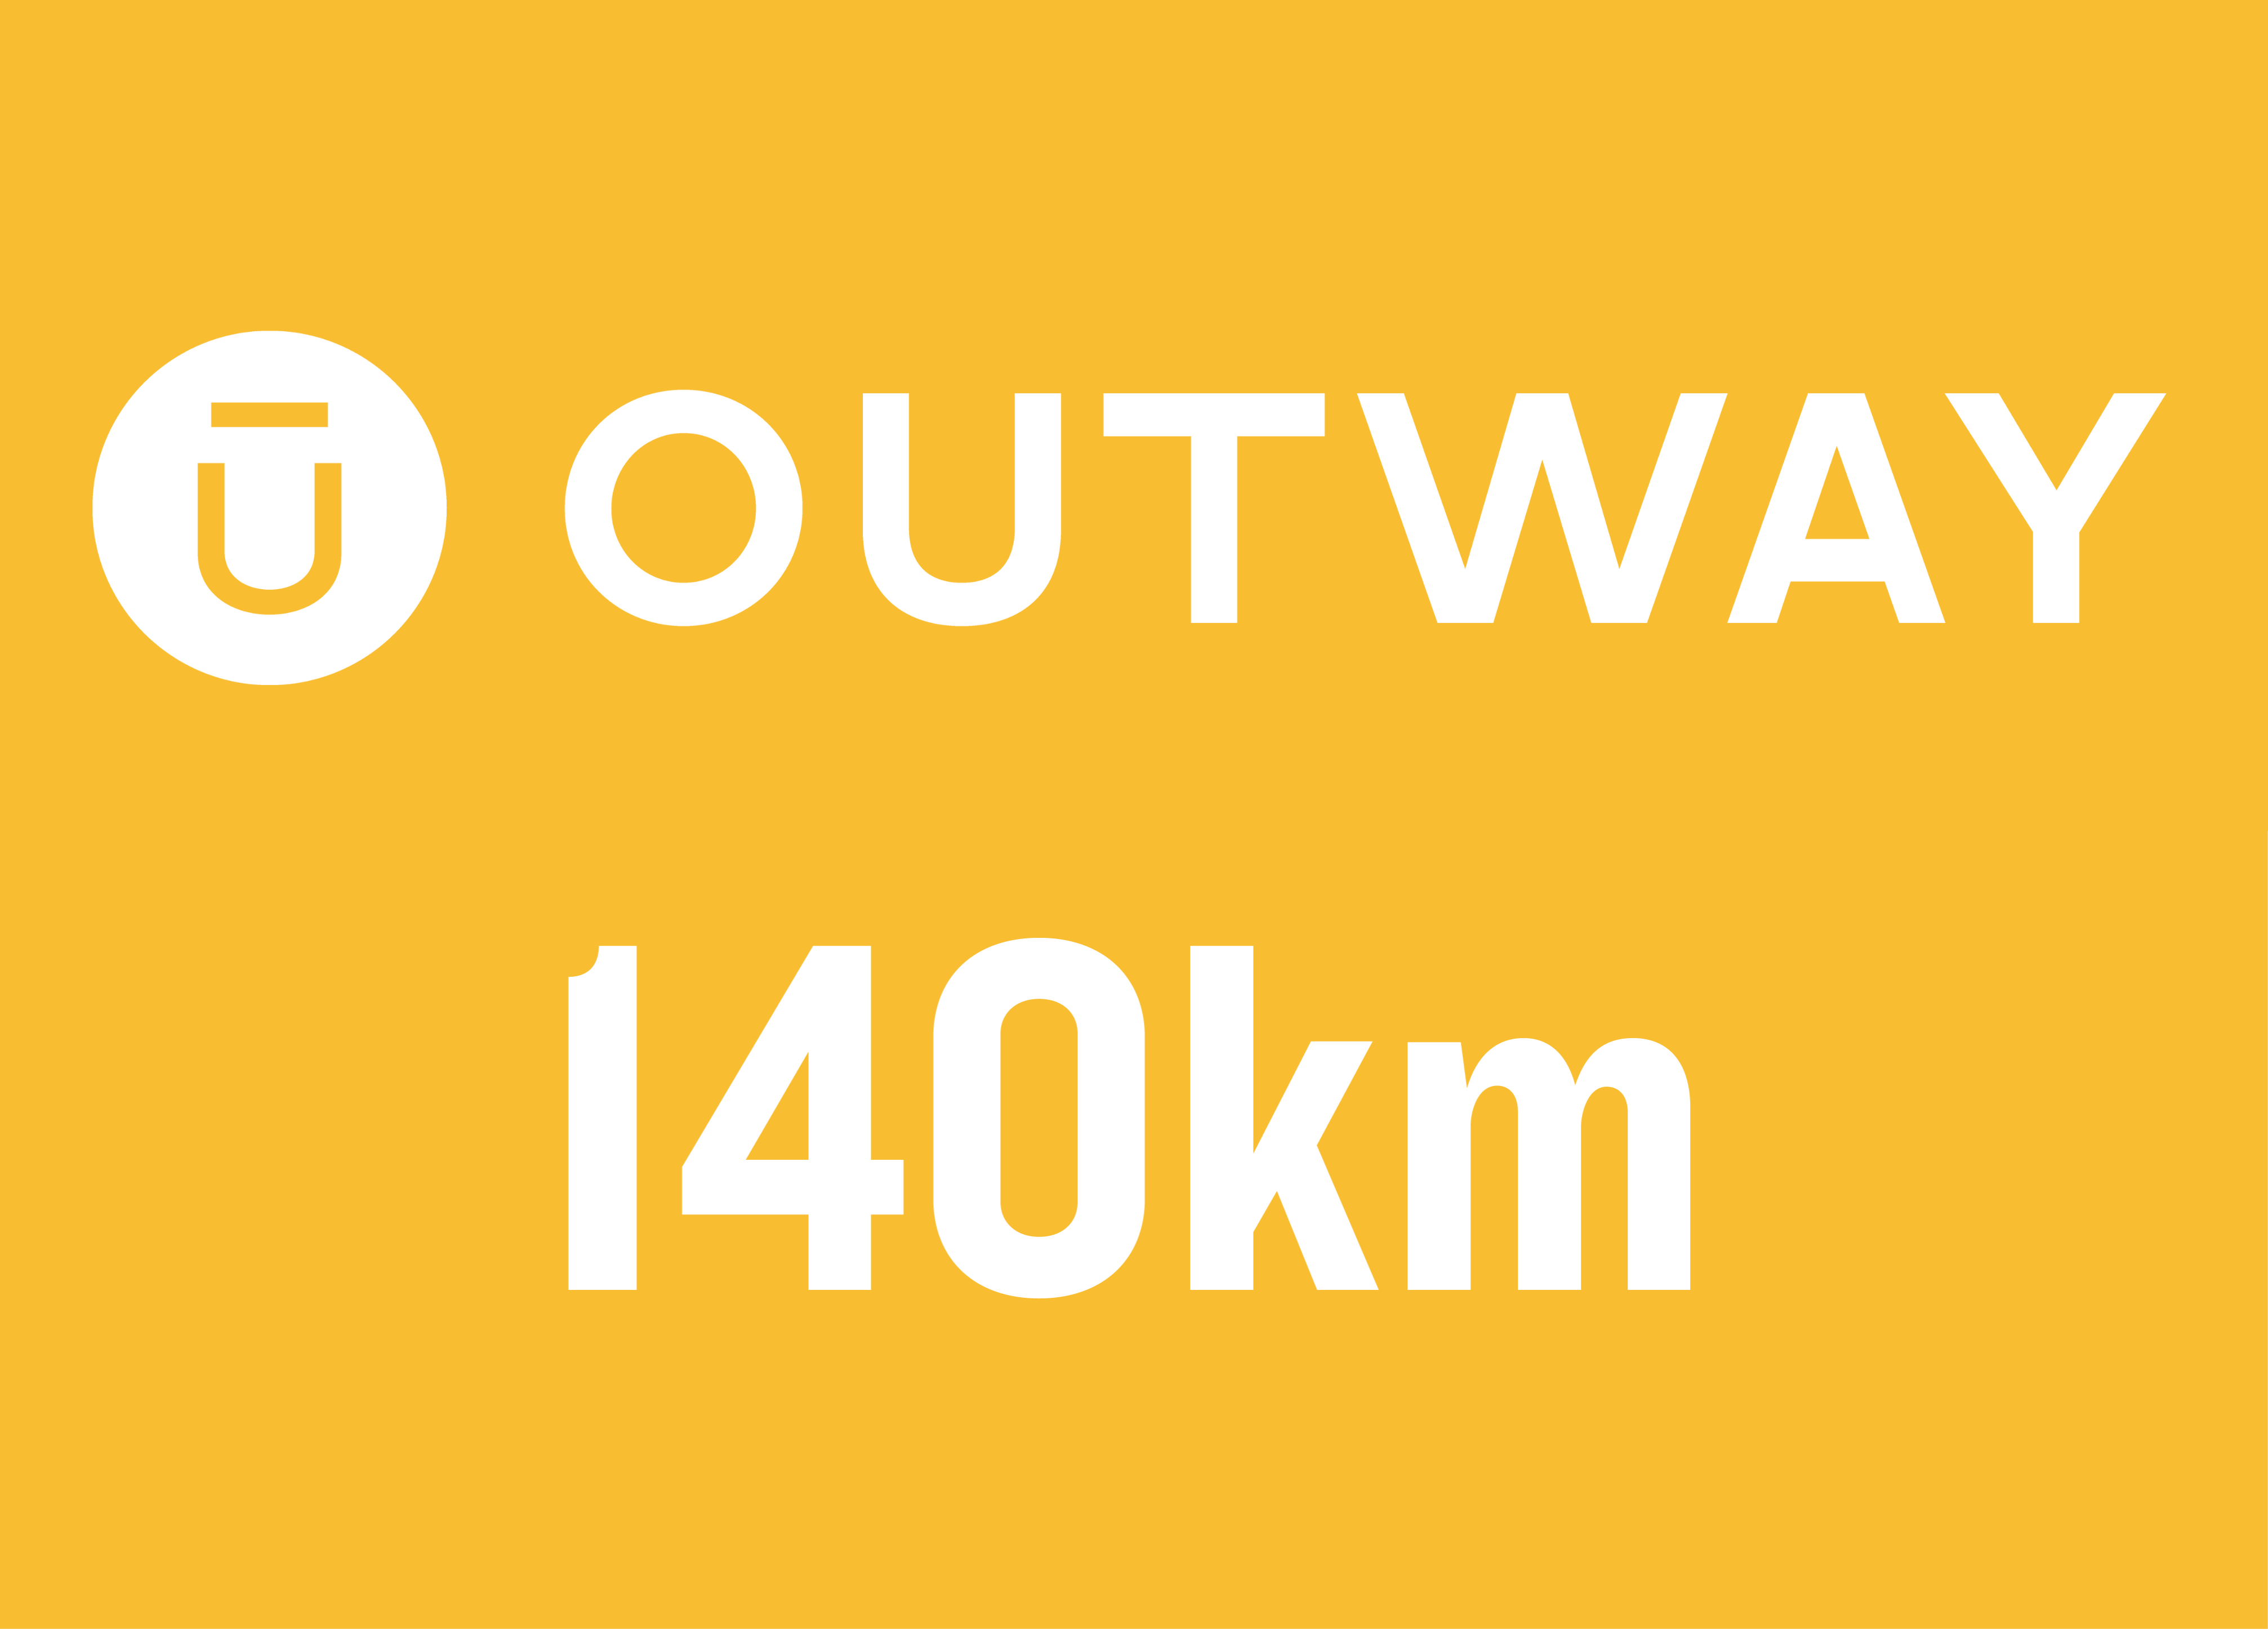 140km outway